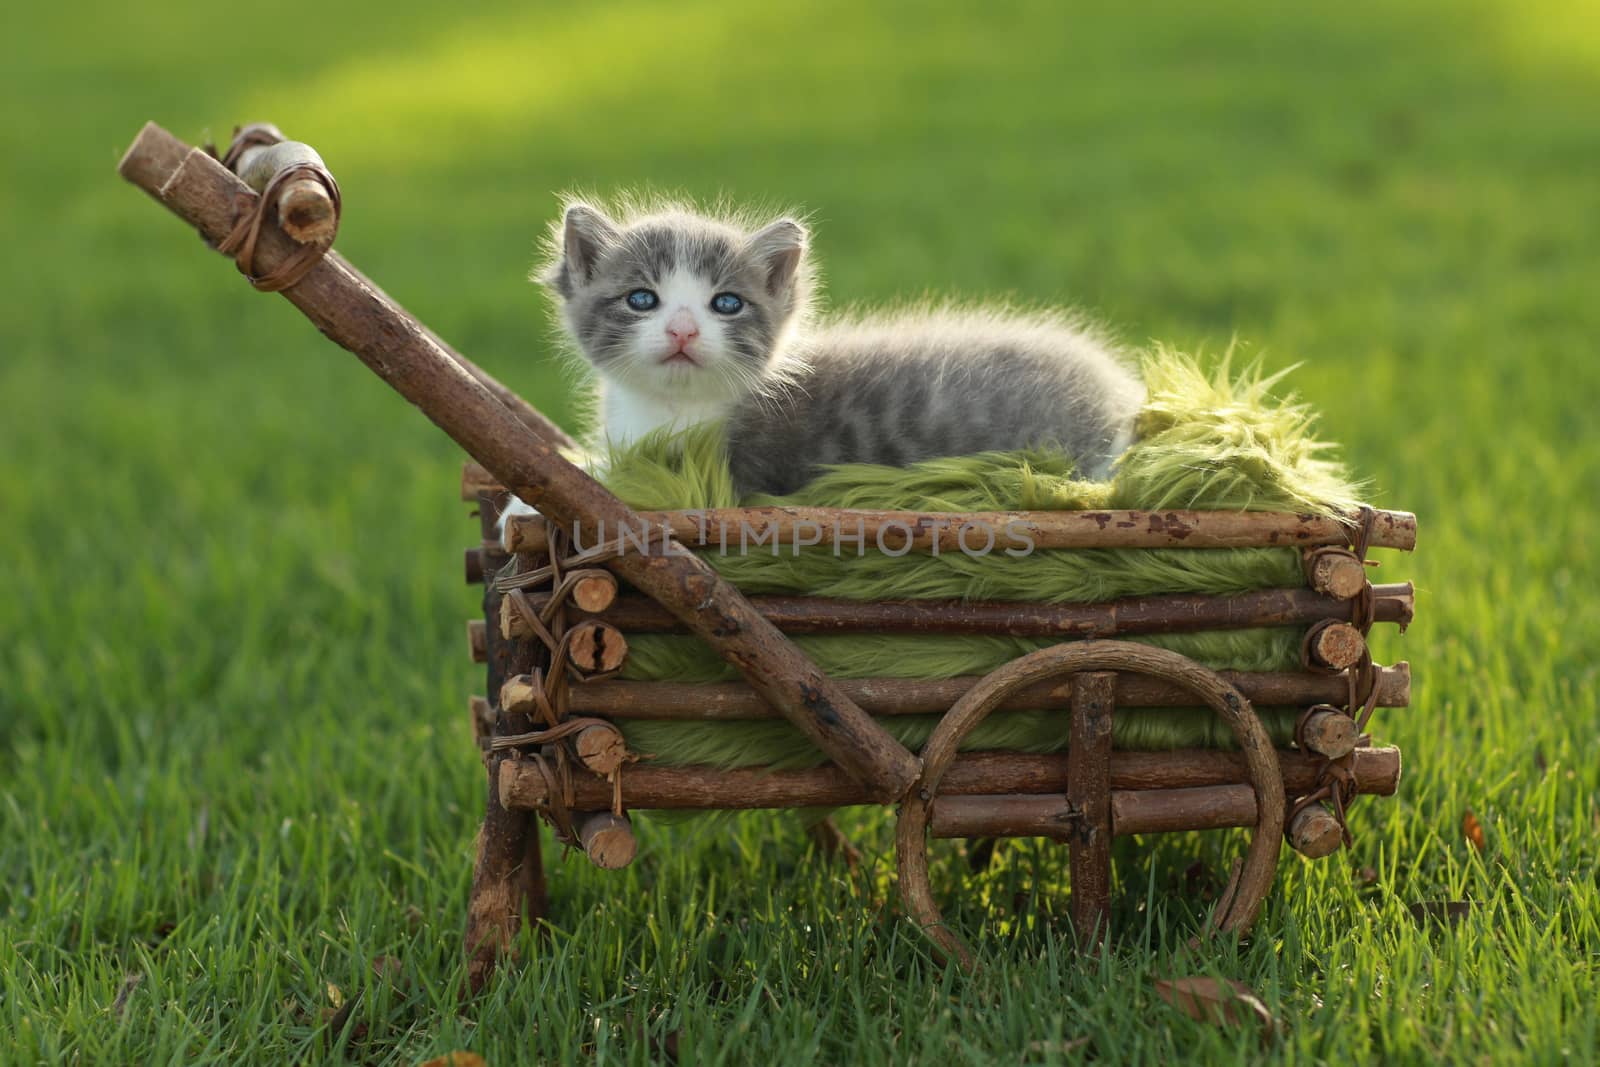 Adorable Baby Kitten Outdoors in Grass